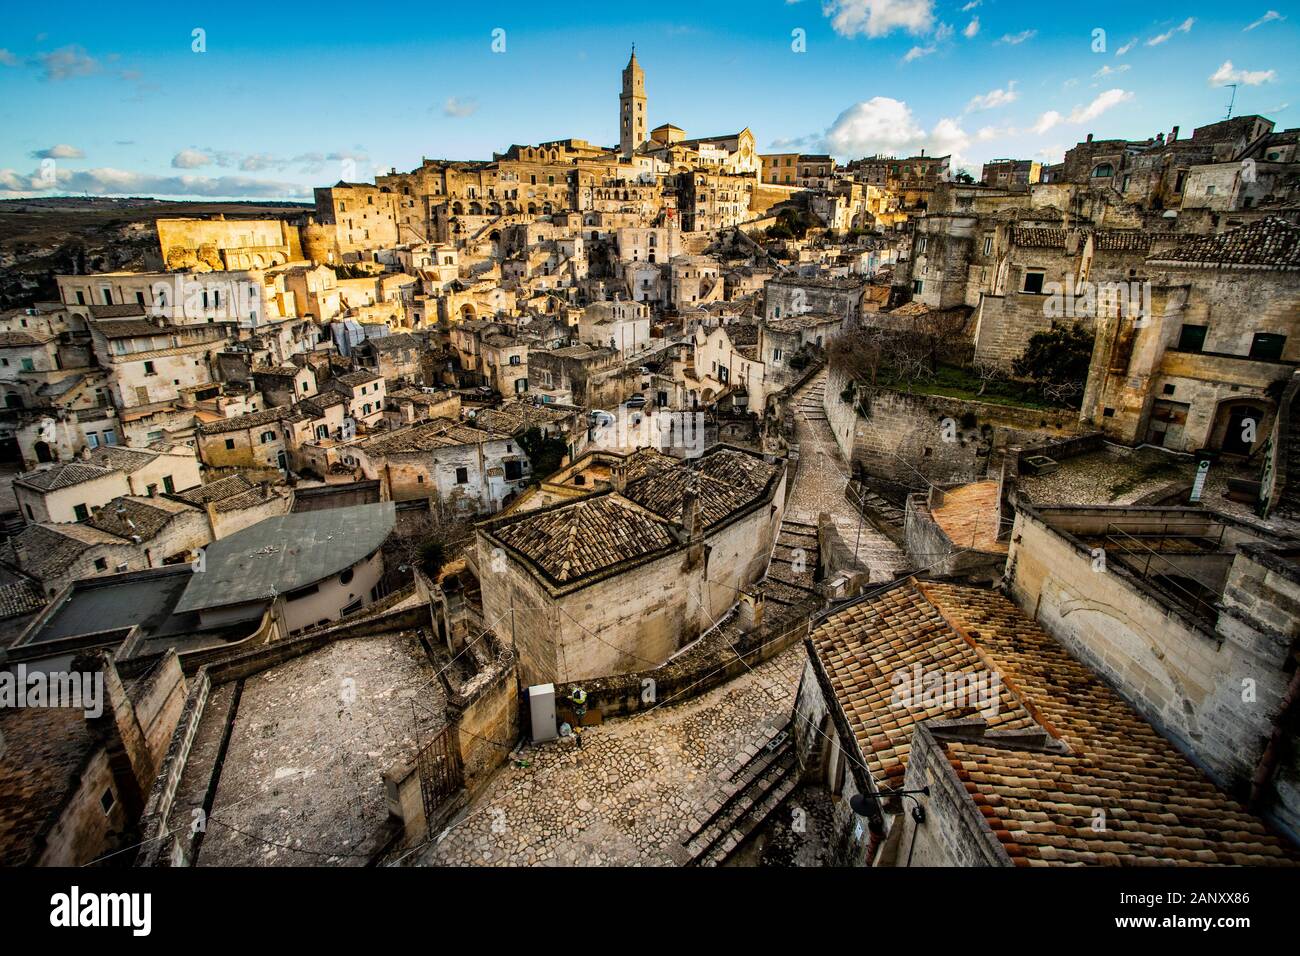 The Sassi, the old town in Matera, Italy Stock Photo